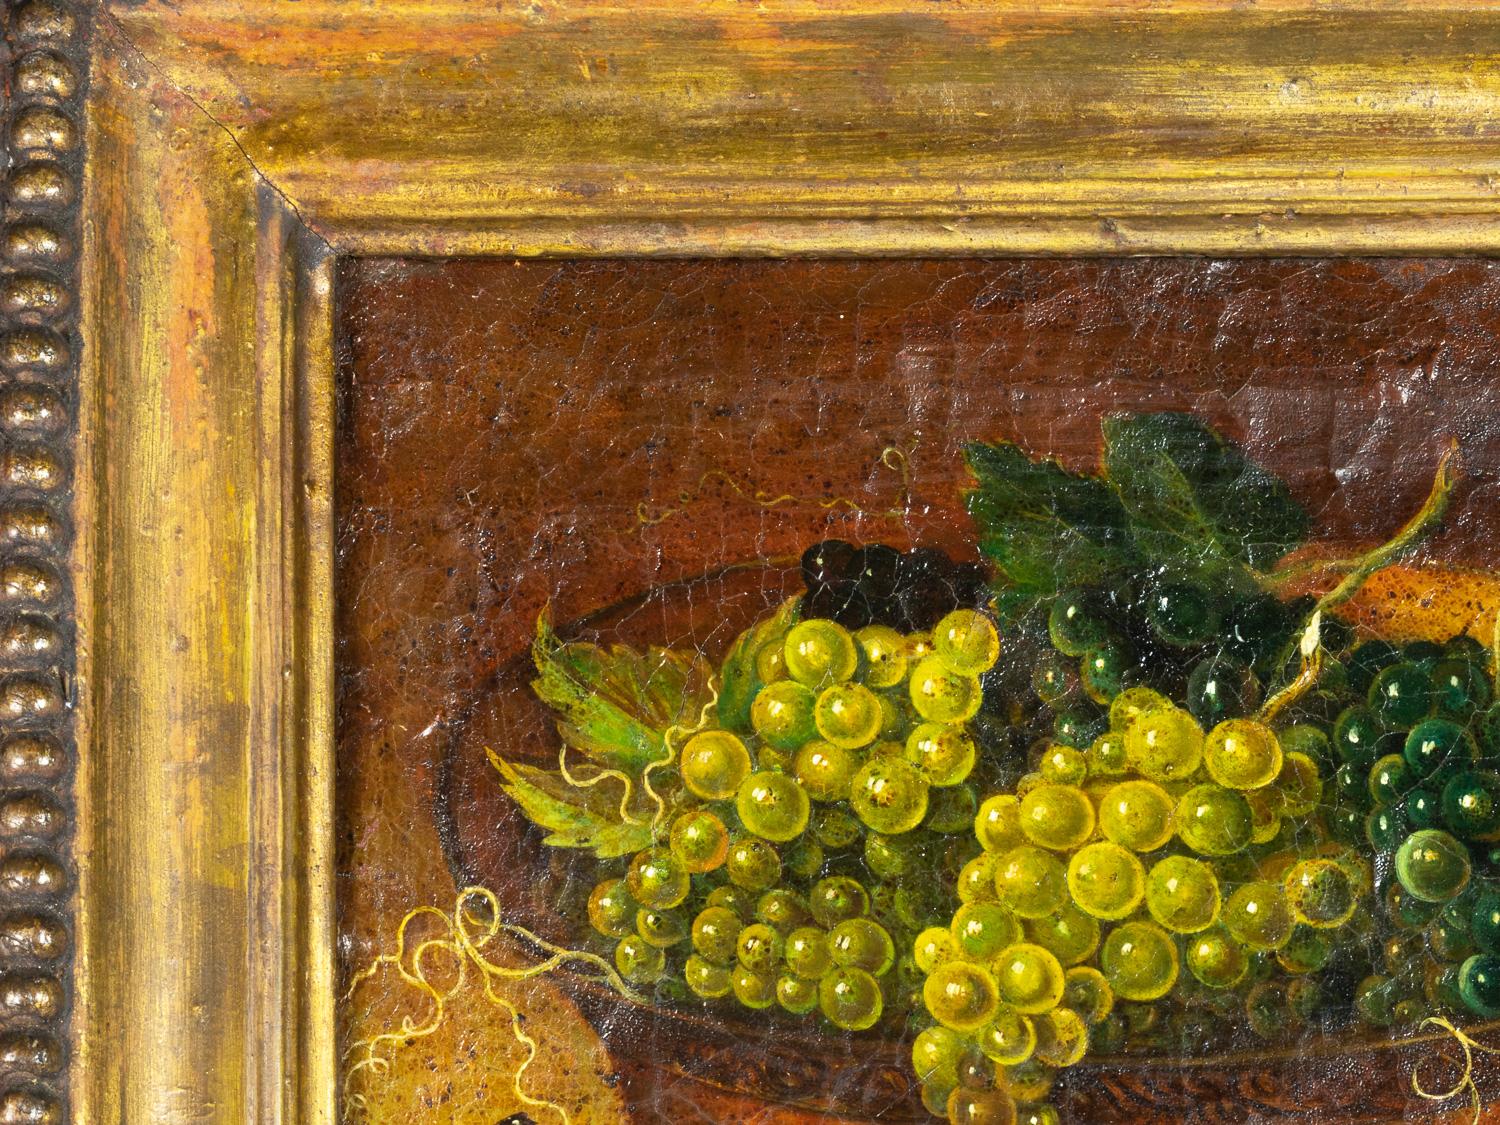 In this 19th-century still life painting, a wide bowl brimming with grapes takes center stage. The artist drew inspiration from the picturesque Provençal style, resulting in a captivating scene.

Frame 52 x 45 cm
Canvas 40 x 31 cm